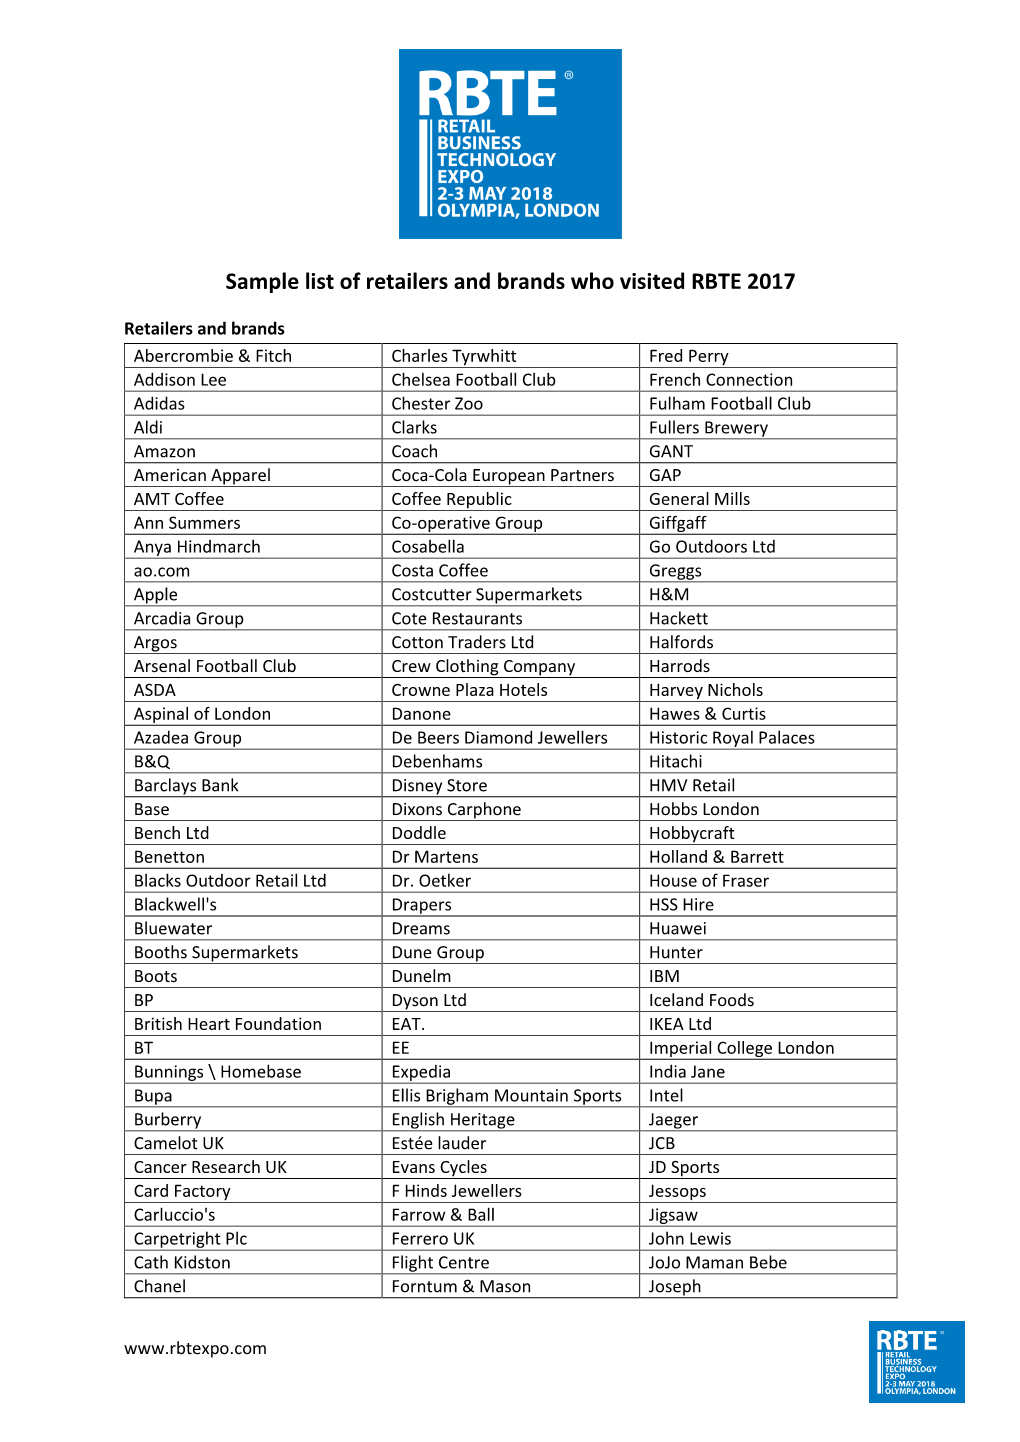 Sample List of Retailers and Brands Who Visited RBTE 2017